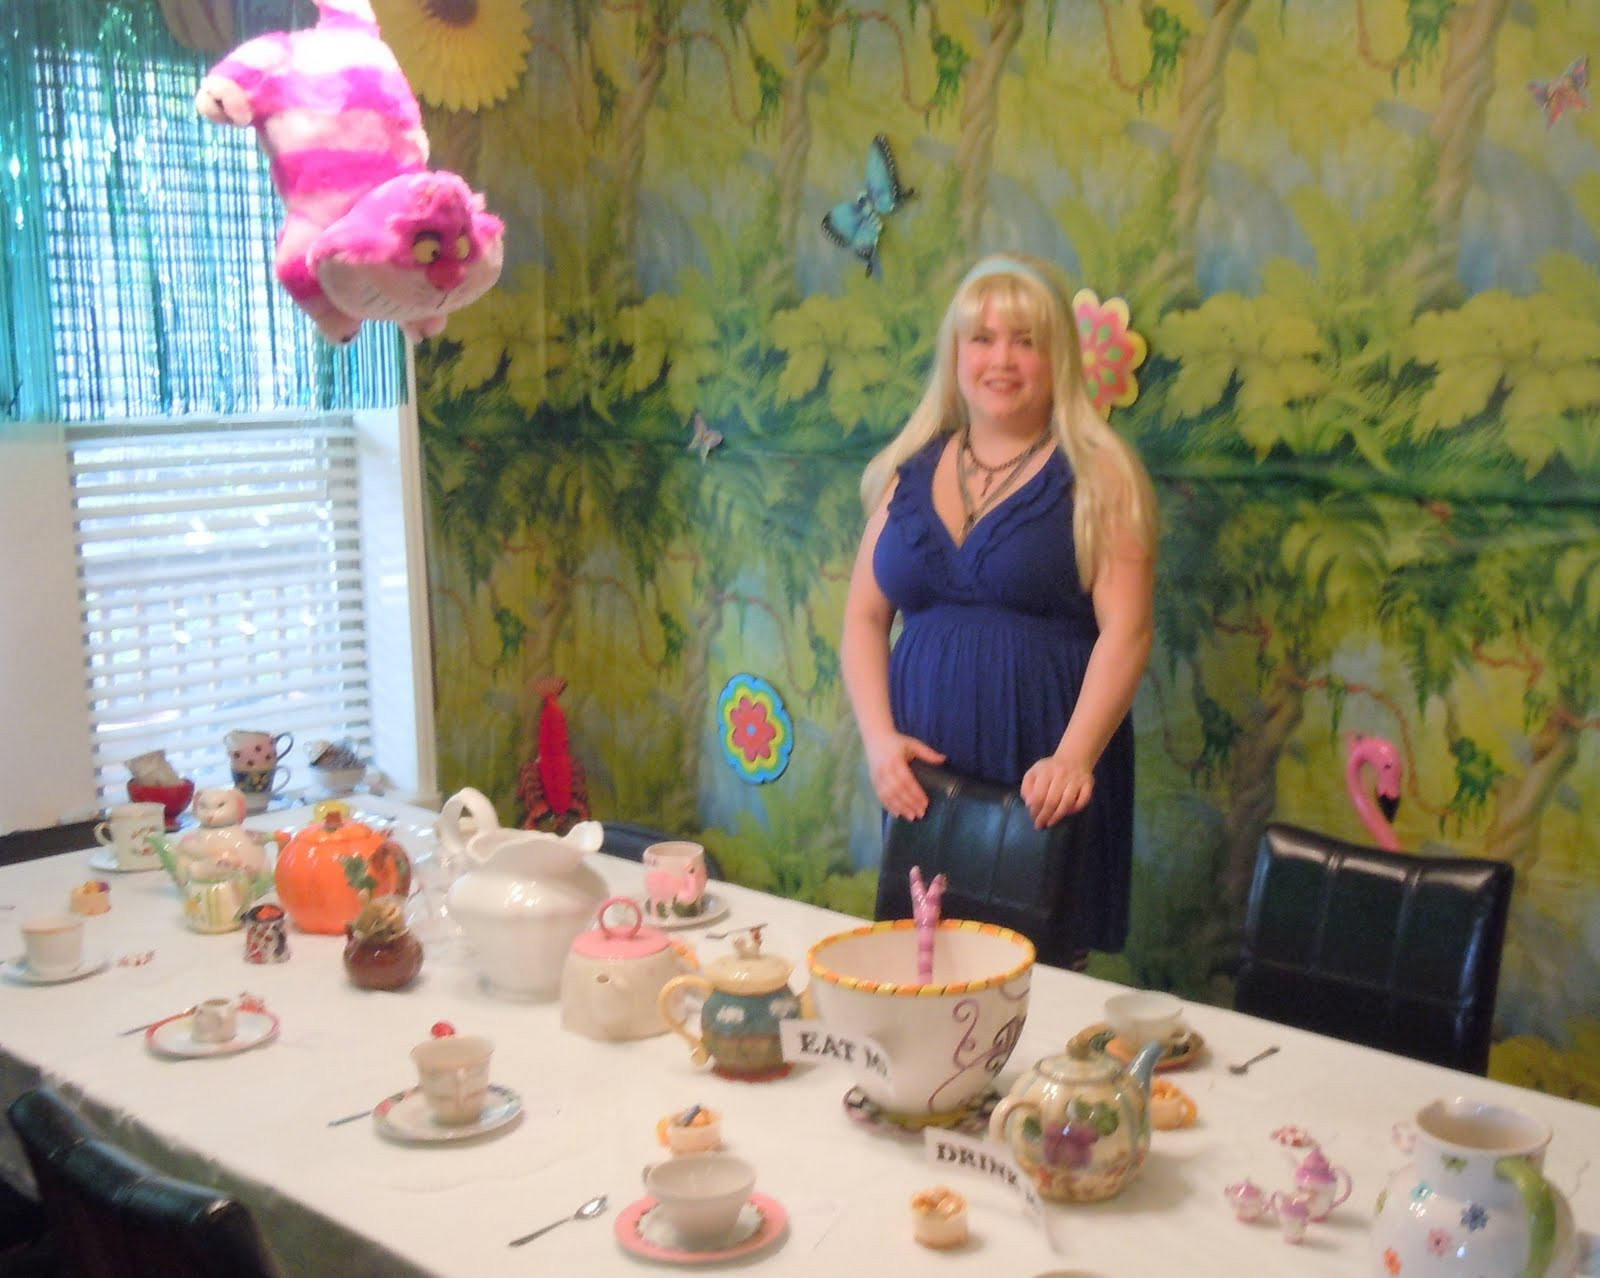 Mad Hatter Tea Party Ideas For Adults
 Cooking and Entertaining with Leah Mad Hatter Tea Party